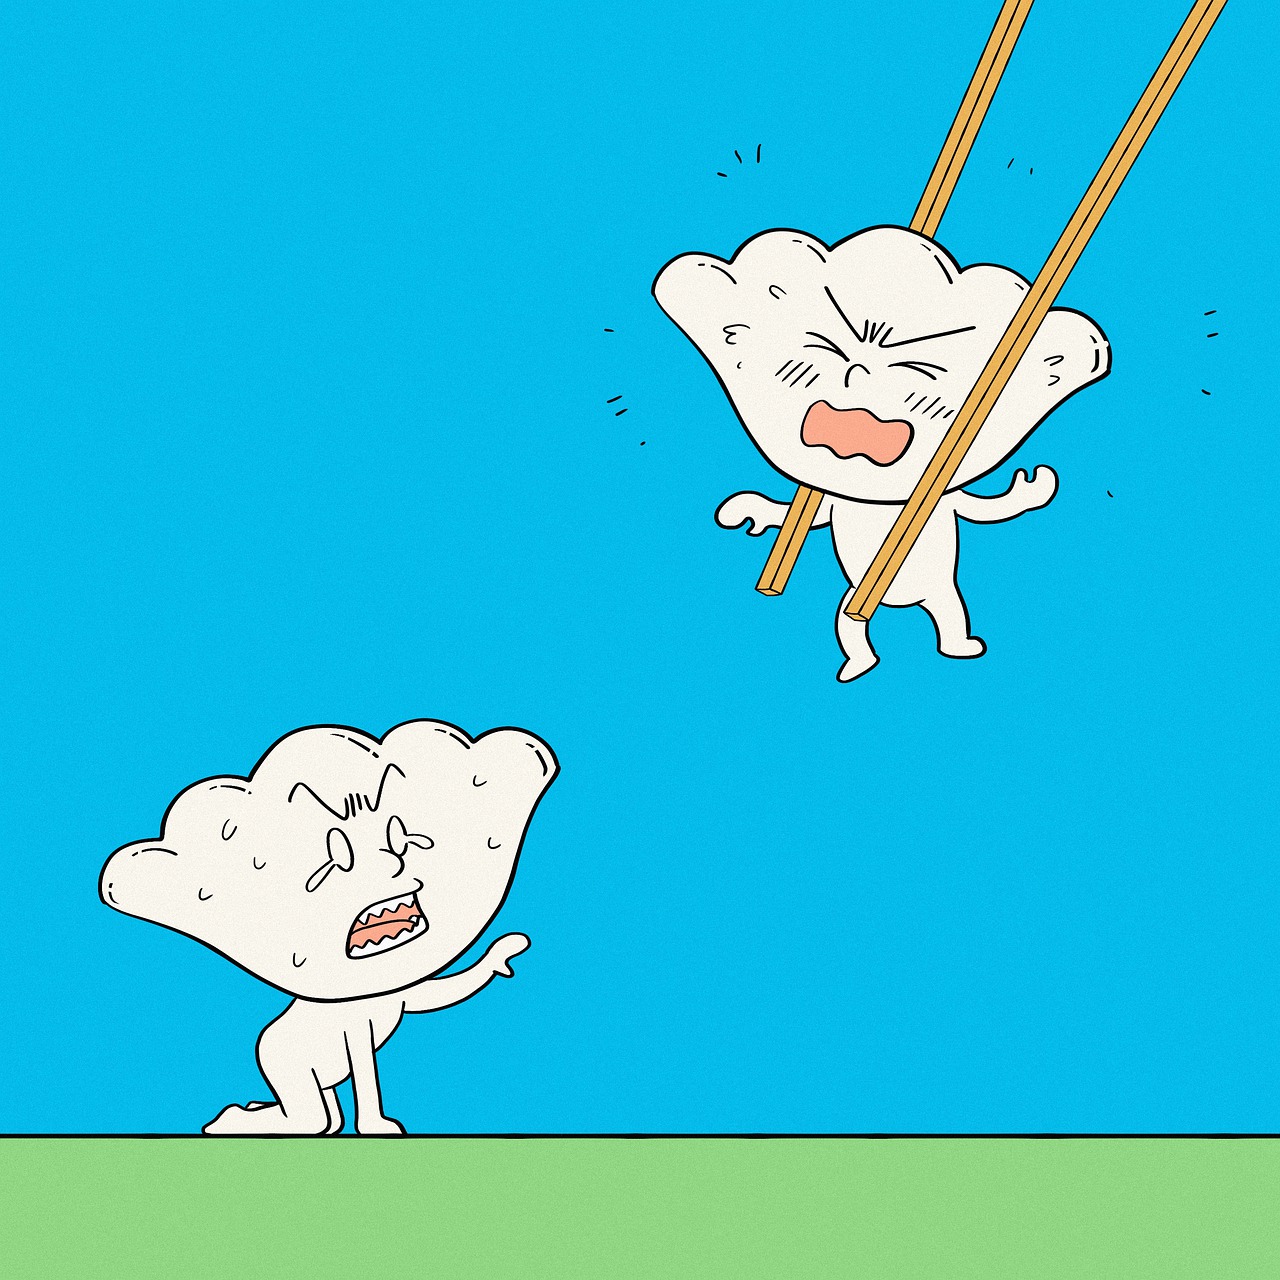 a cartoon character holding onto a pair of chopsticks, an illustration of, flickr, tremella - fuciformis, hanging rope, they are fighting very angry, dentist